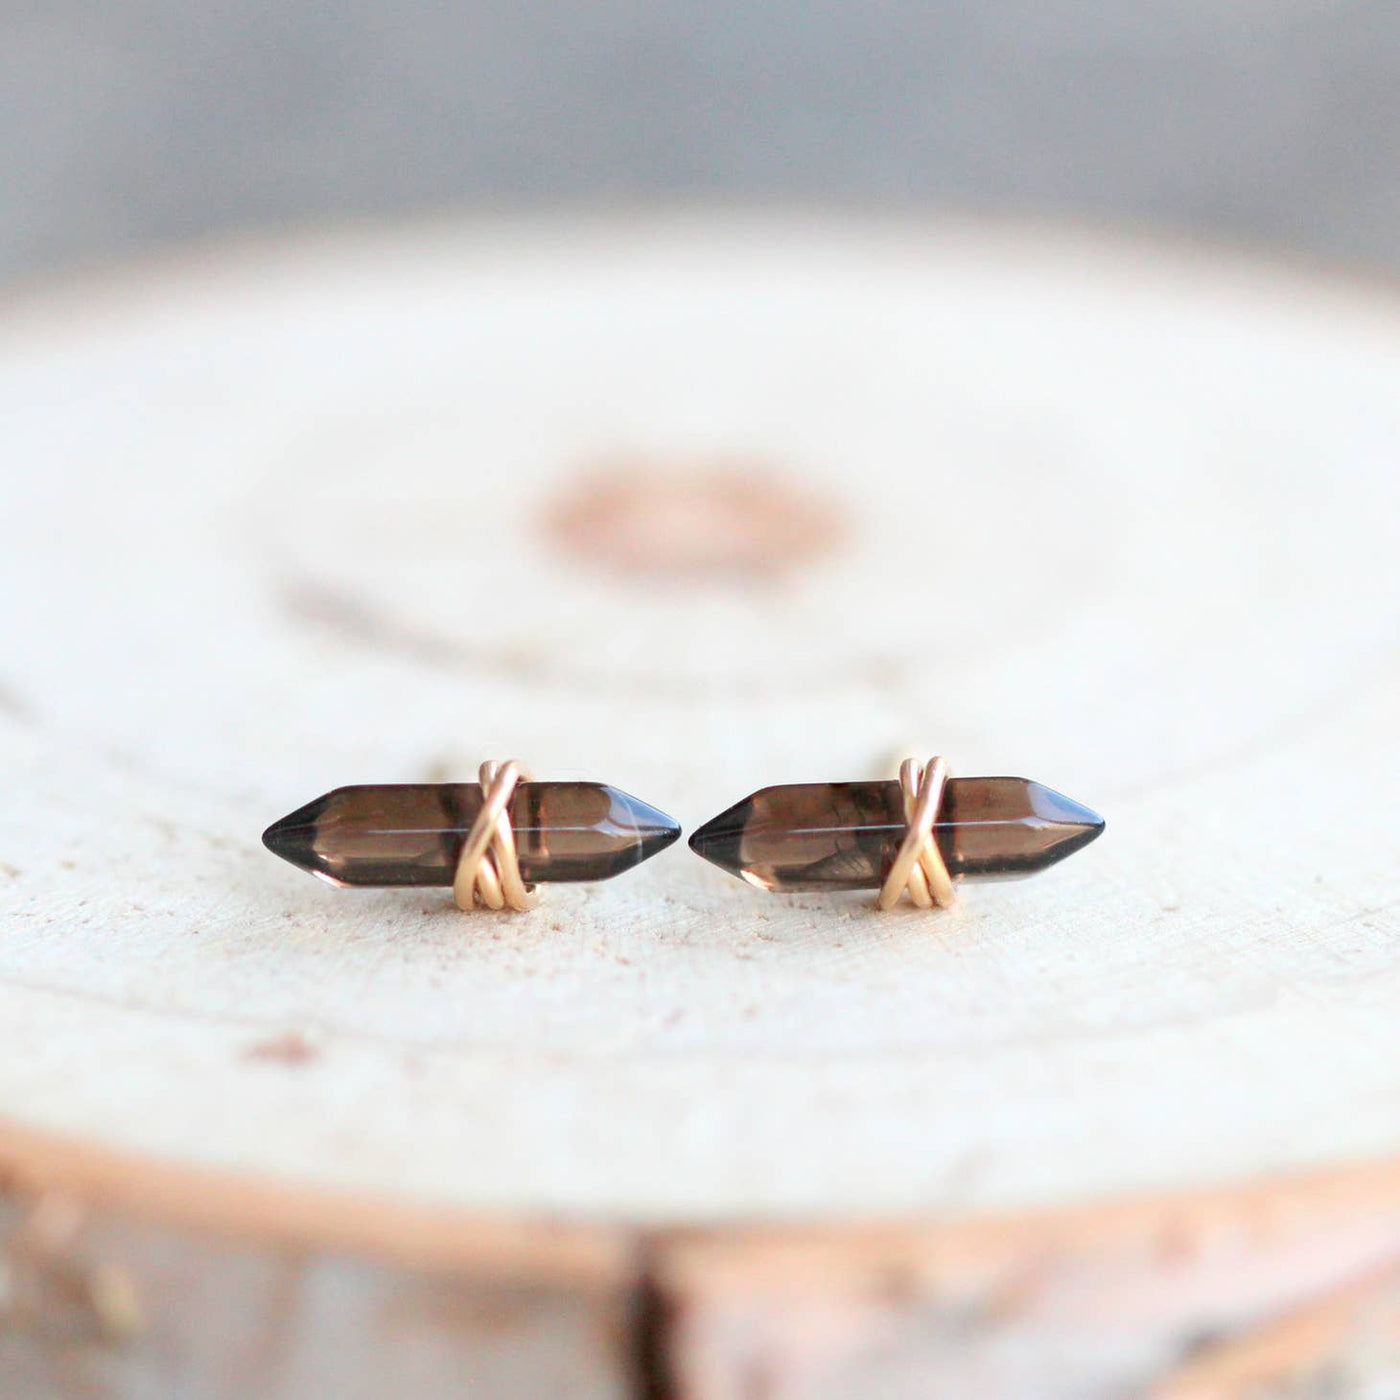 Stud earrings with smokey quartz gemstones wrapped in 14k gold fill earring wire